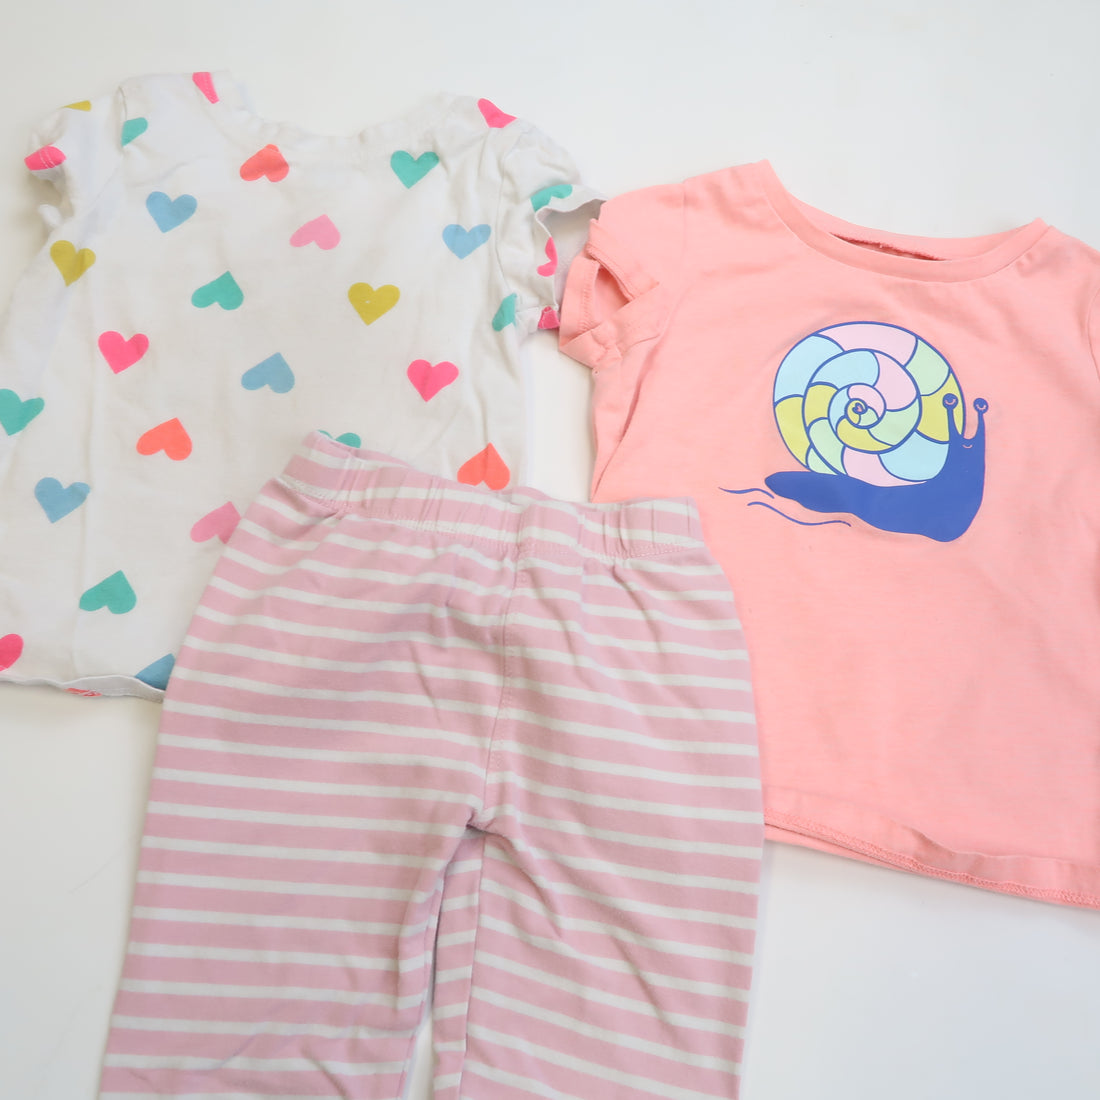 Mixed Brands - Daycare Set (2T)